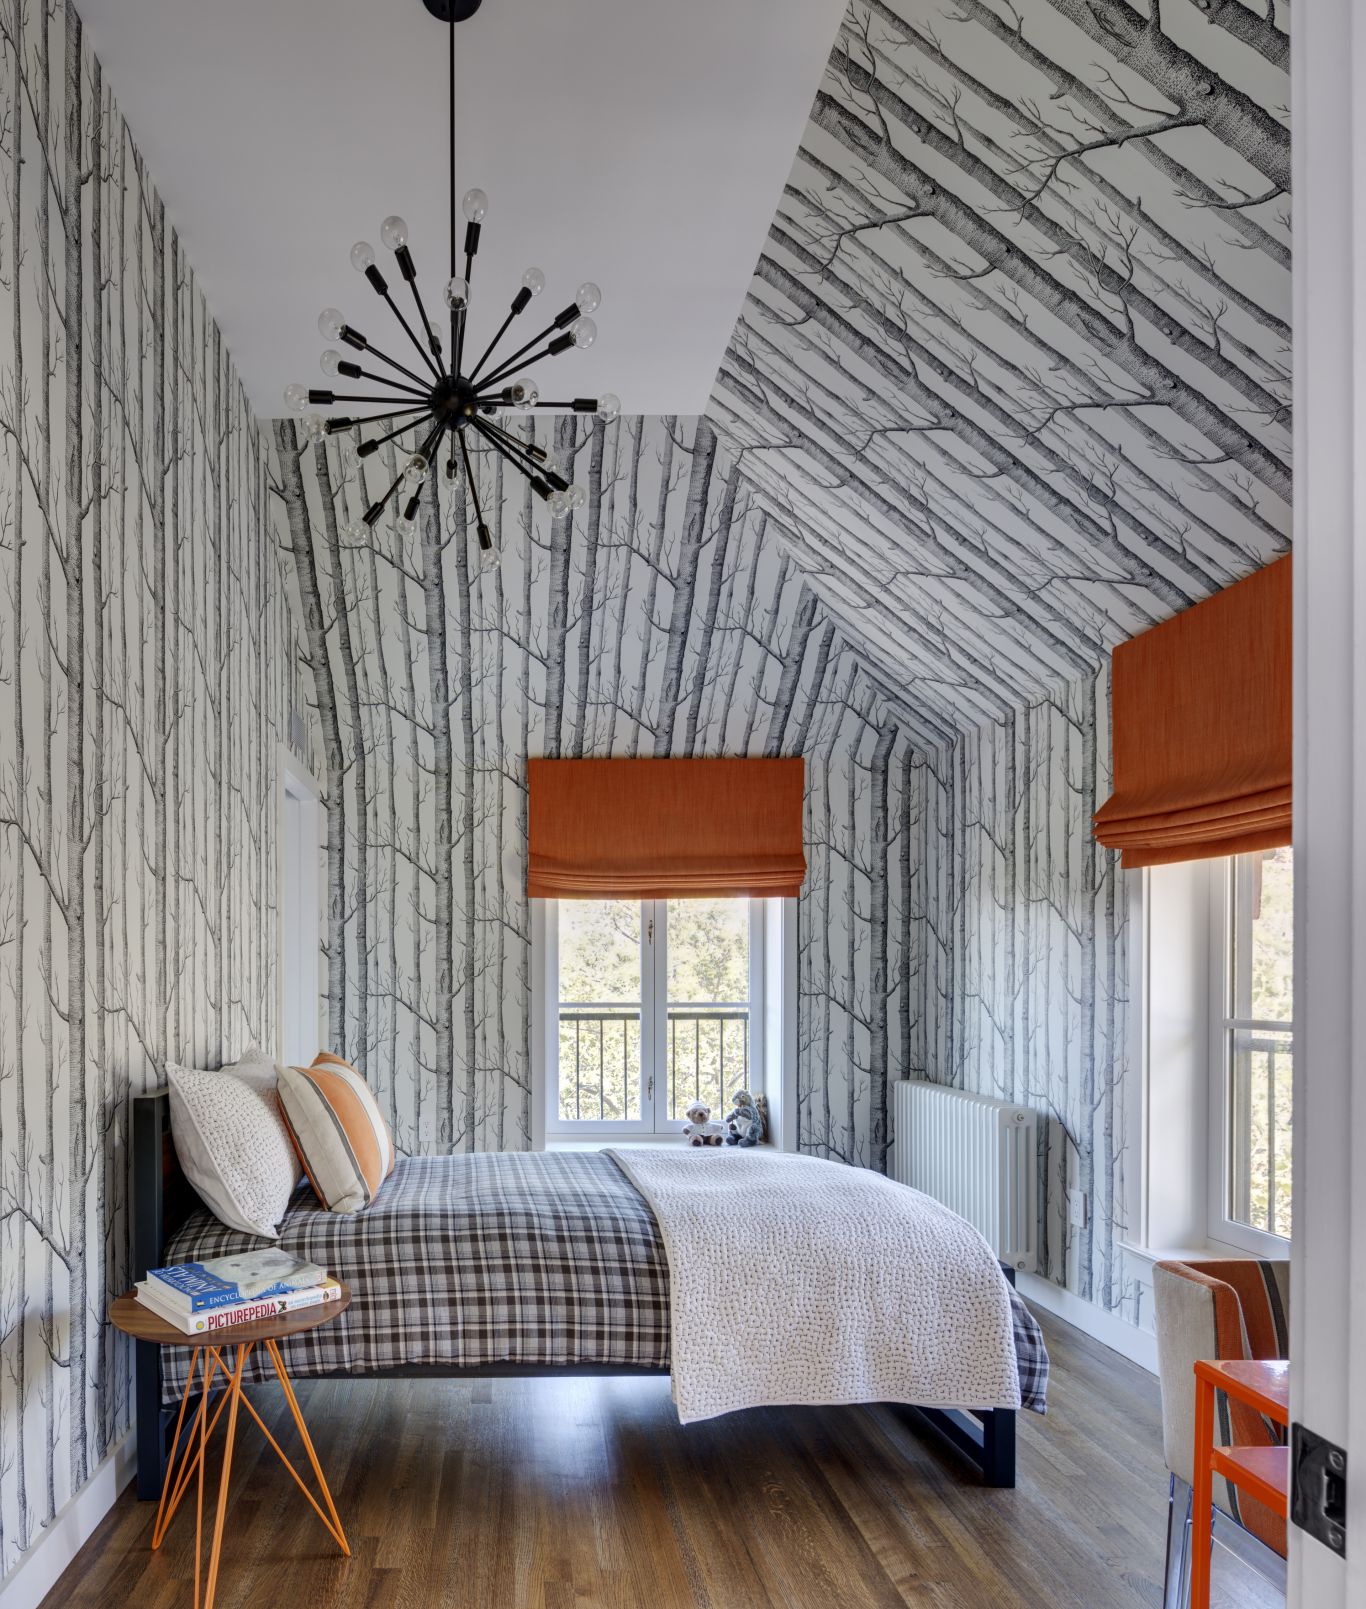 Wallpaper on a slanted ceiling in a bedroom